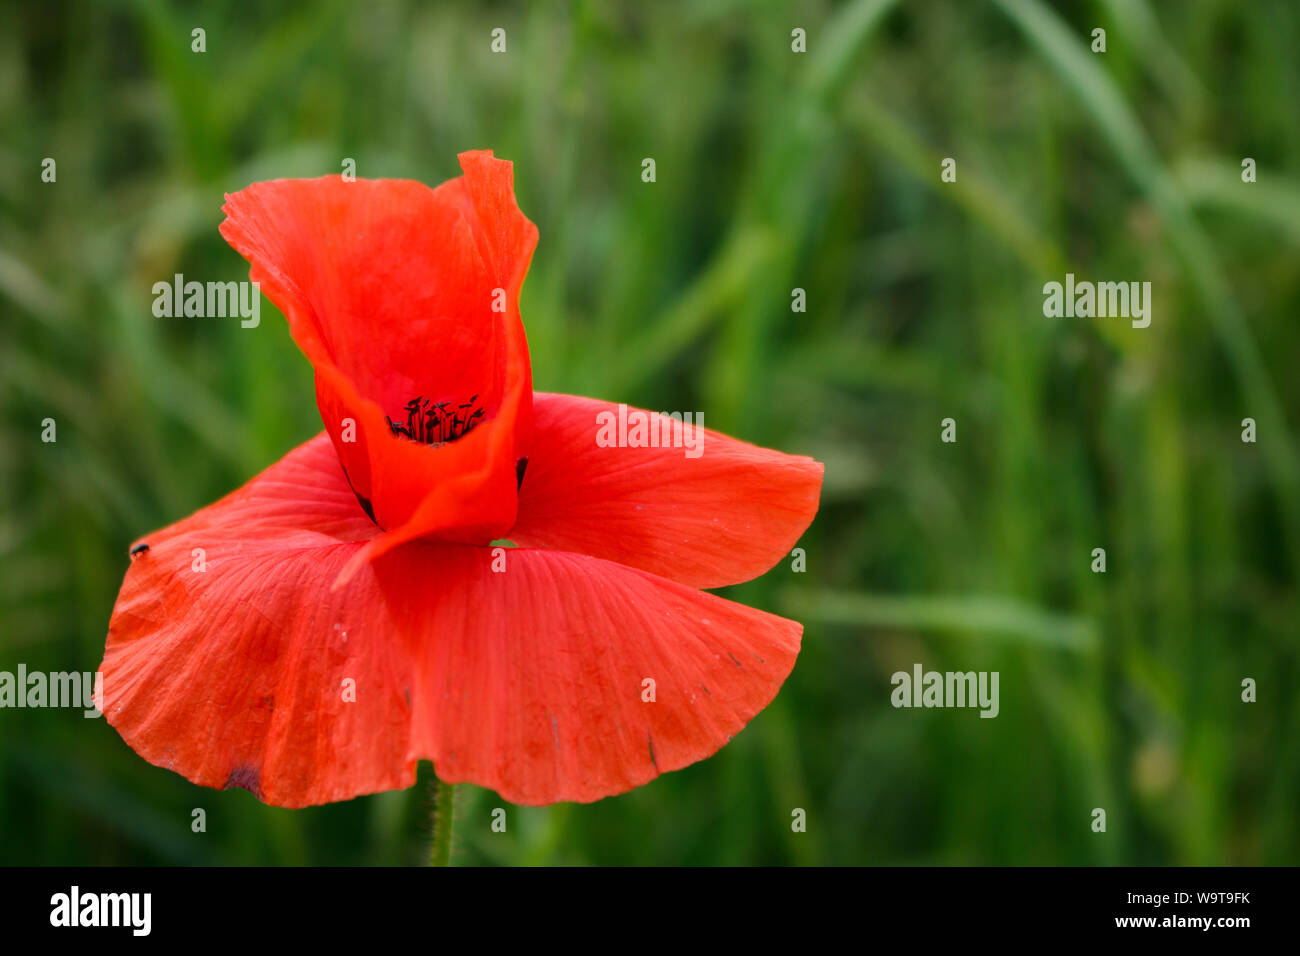 Red flower in the grass field Stock Photo